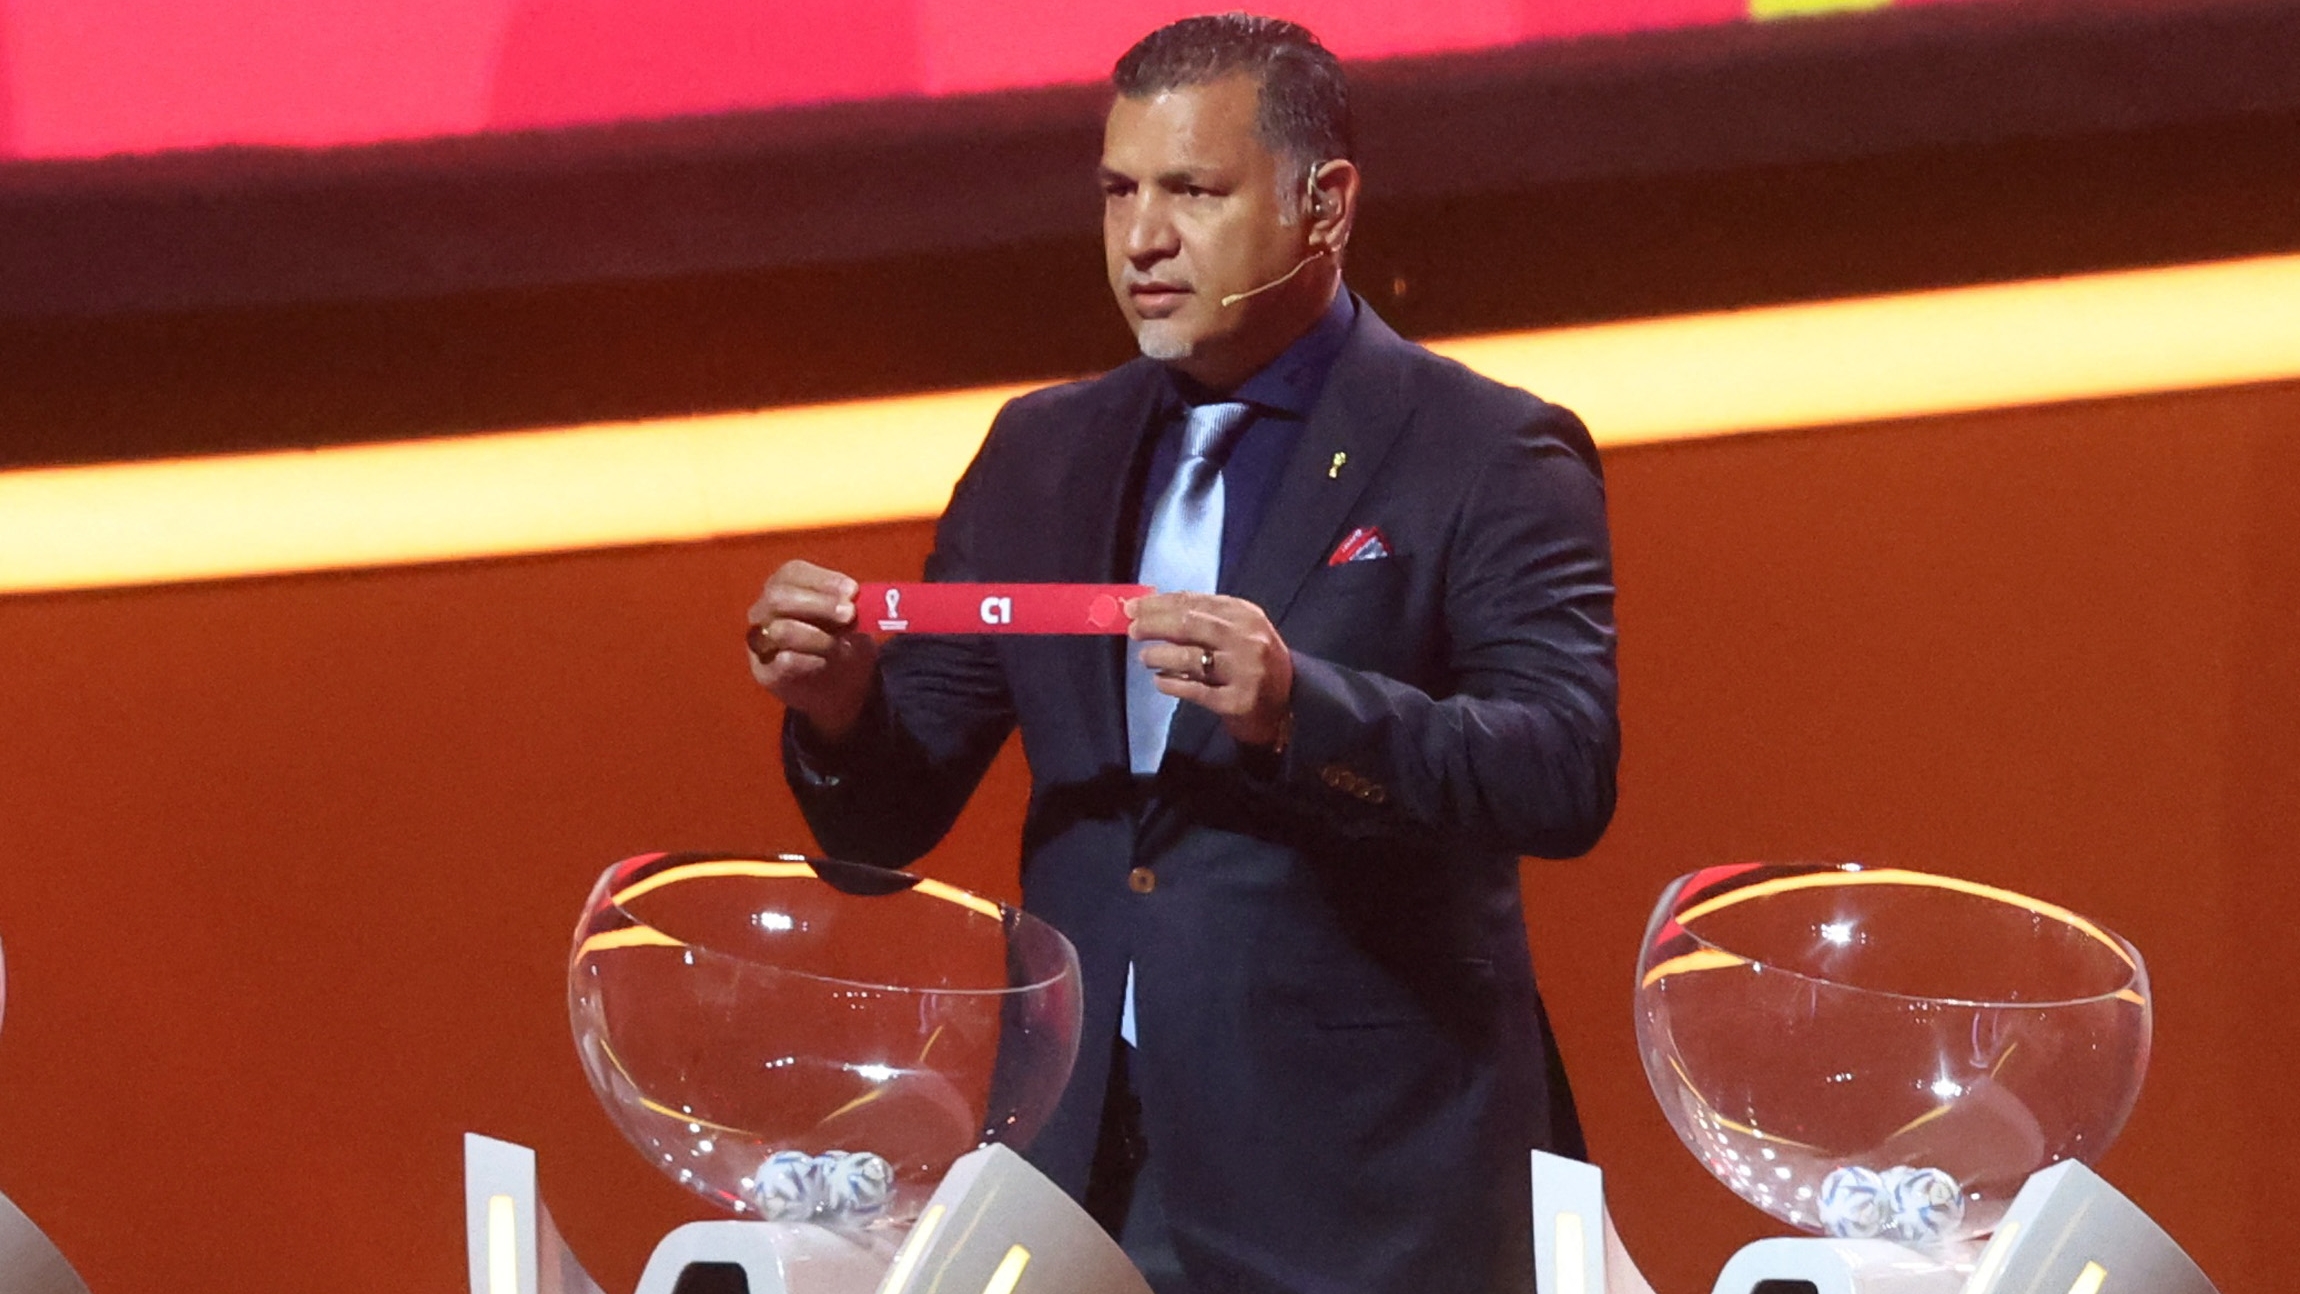 Ali Daei participated in the draw for the World Cup in Qatar, but refused the invitation to the matches after the outbreak of protests (Reuters)